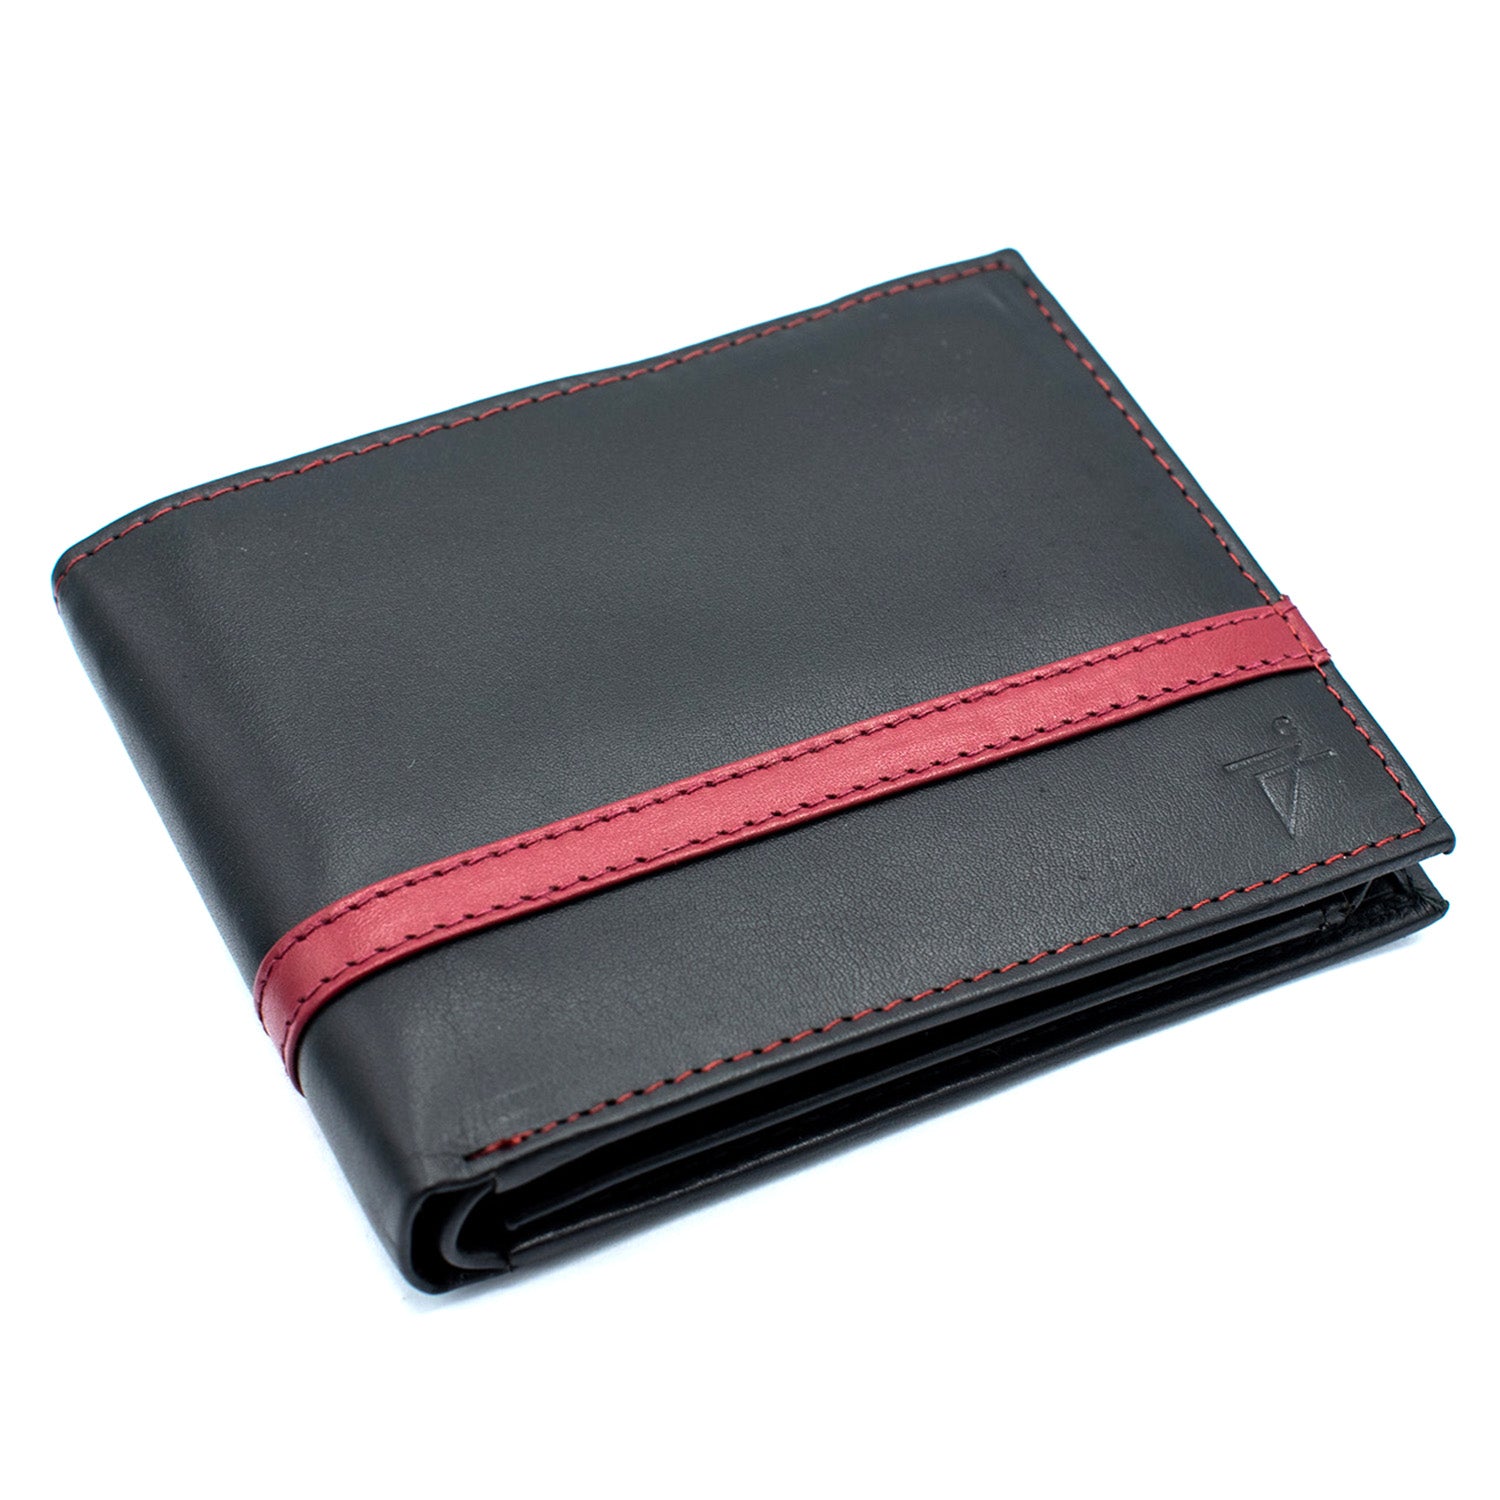 The Tanned Cow Super Slim Bifold Wallet- Genuine Leather Minimalist Front Pocket Wallets for Men with Money Clip, RFID Blocking (Black/Red)